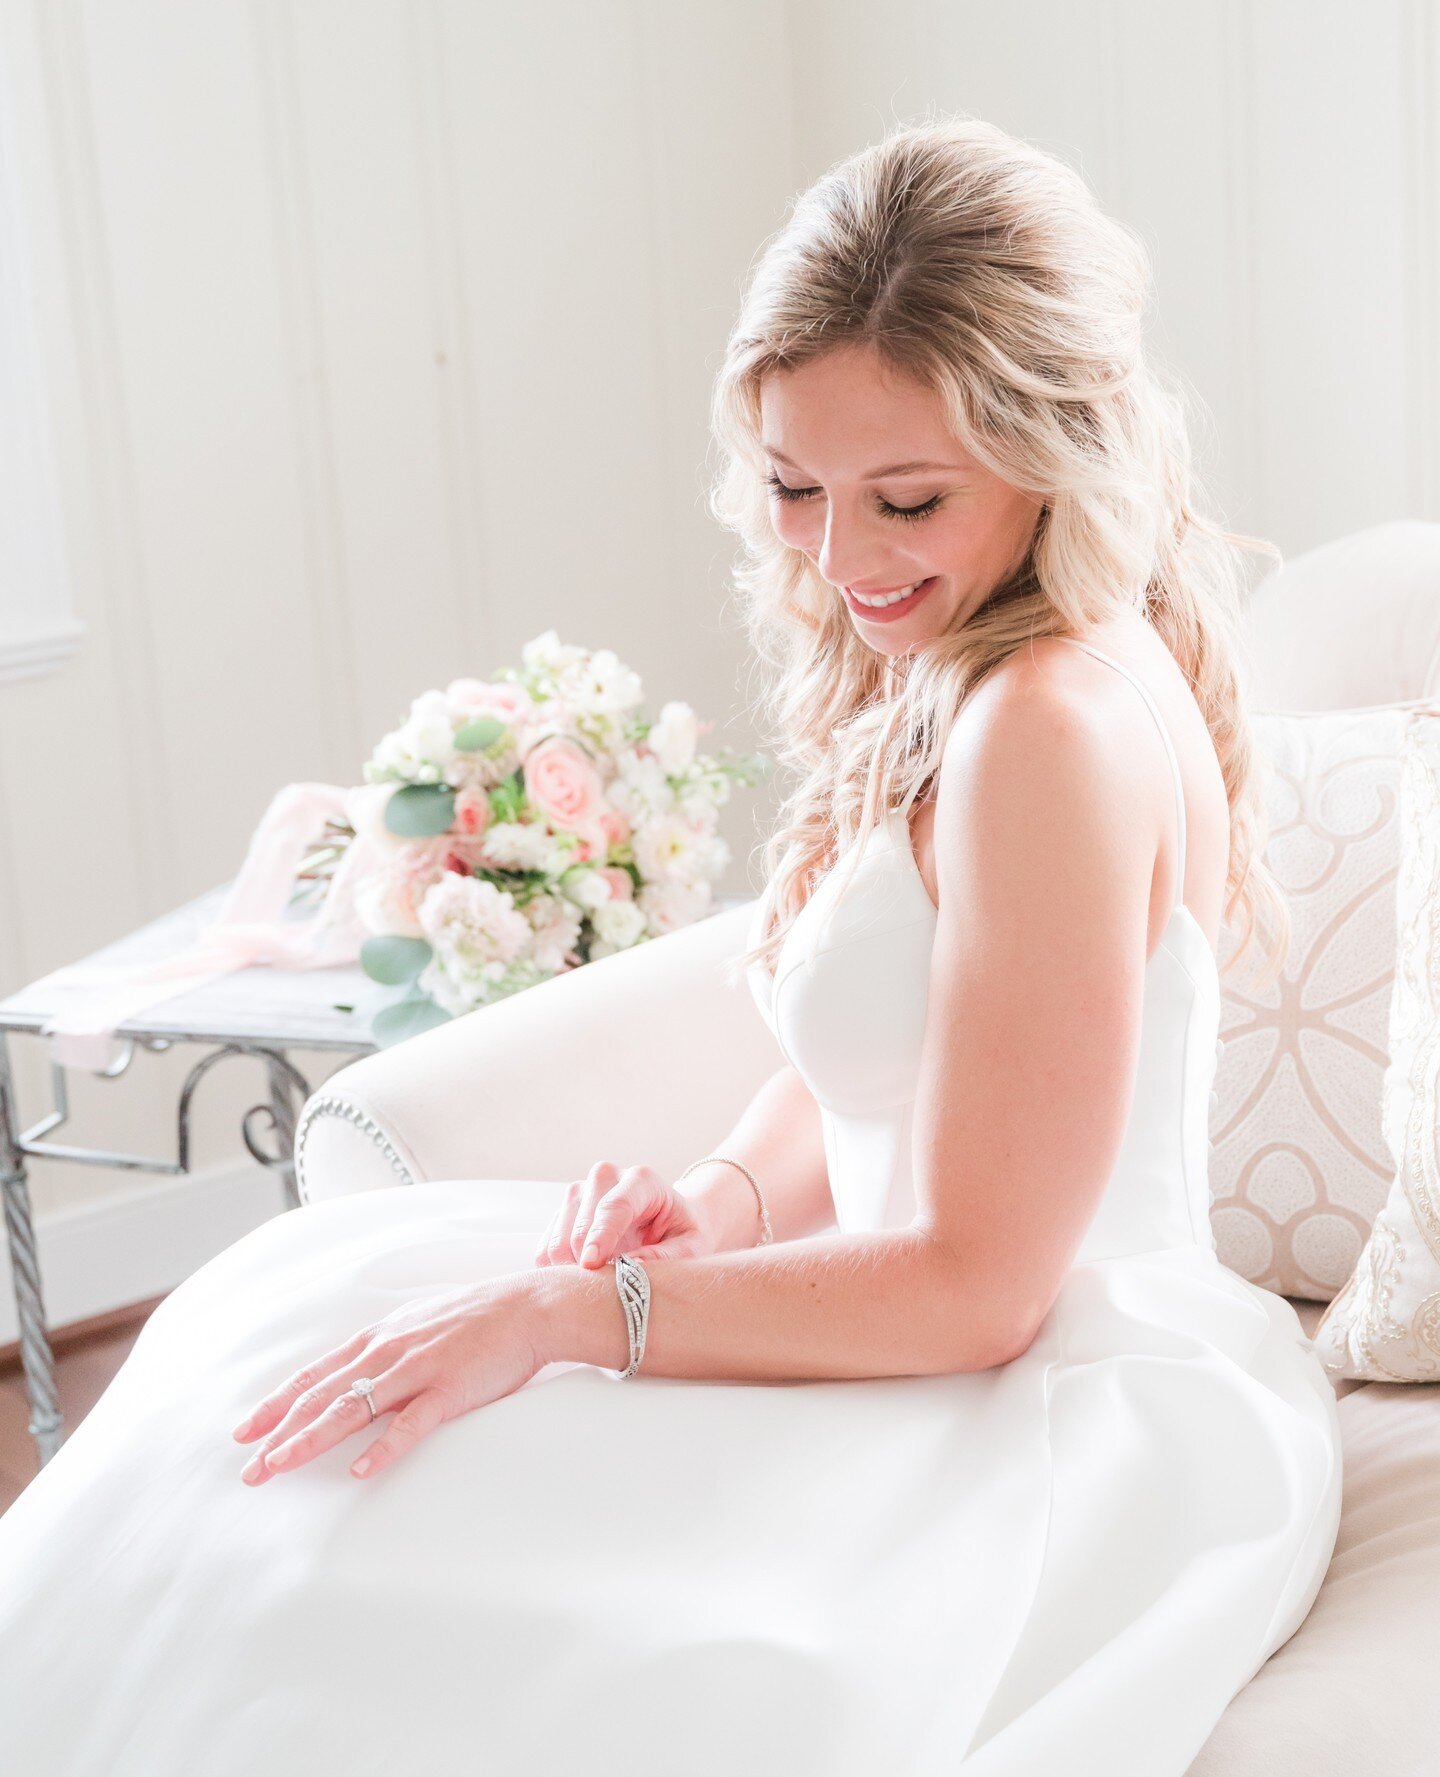 Attention all brides-to-be! 💍👰⁠
⁠
Are you ready to find the perfect wedding dress for your big day? Scheduling an appointment to try on bridal gowns is the first step in finding the dress of your dreams.⁠
⁠
At our bridal boutique, we offer a wide s